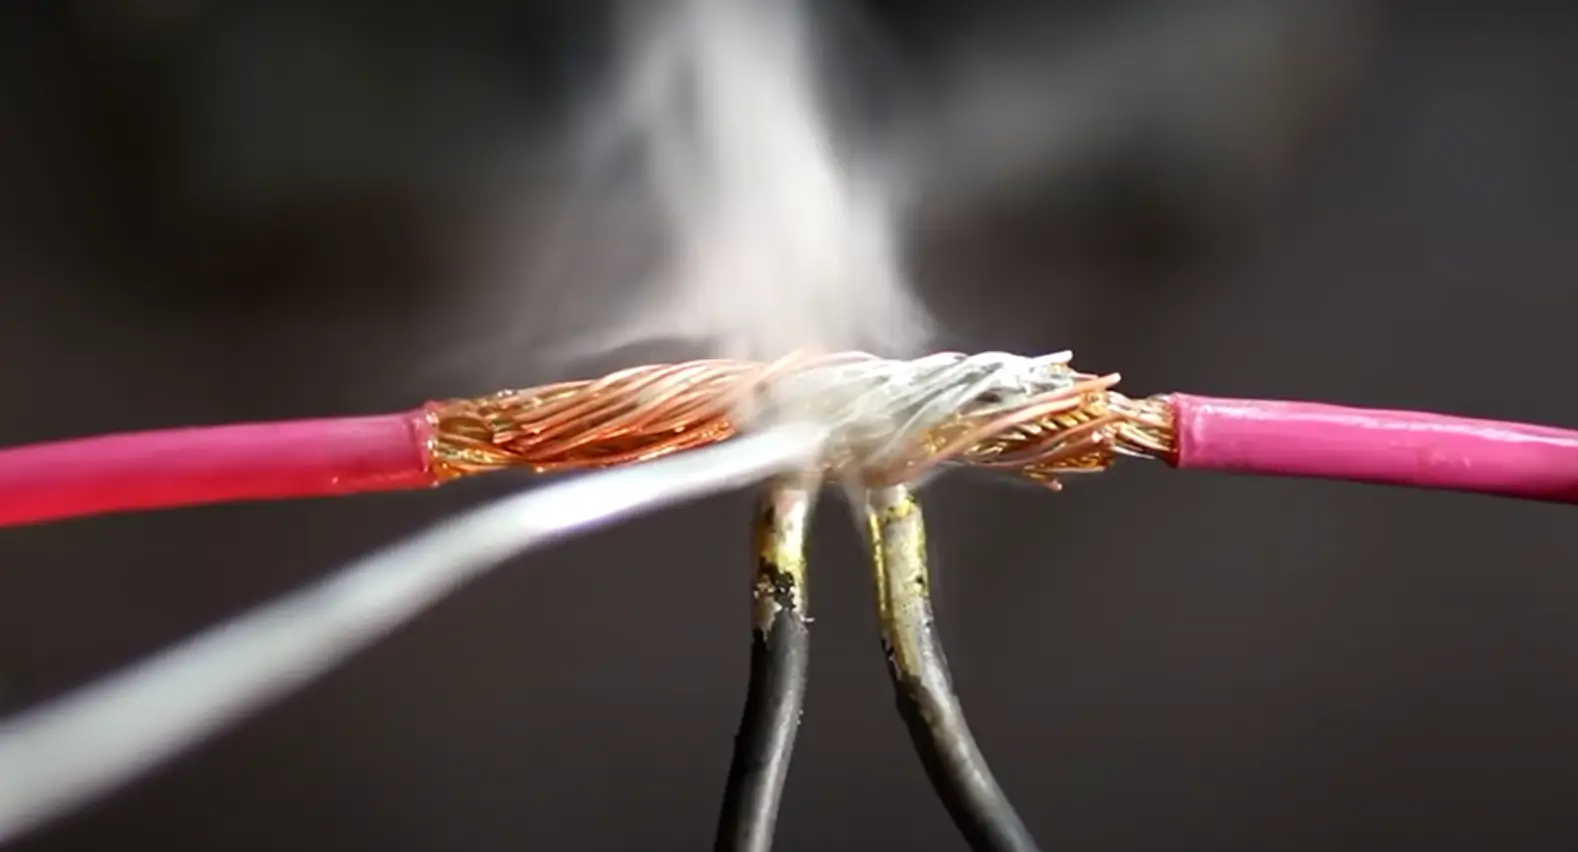 The quickest way to solder wires to connectors